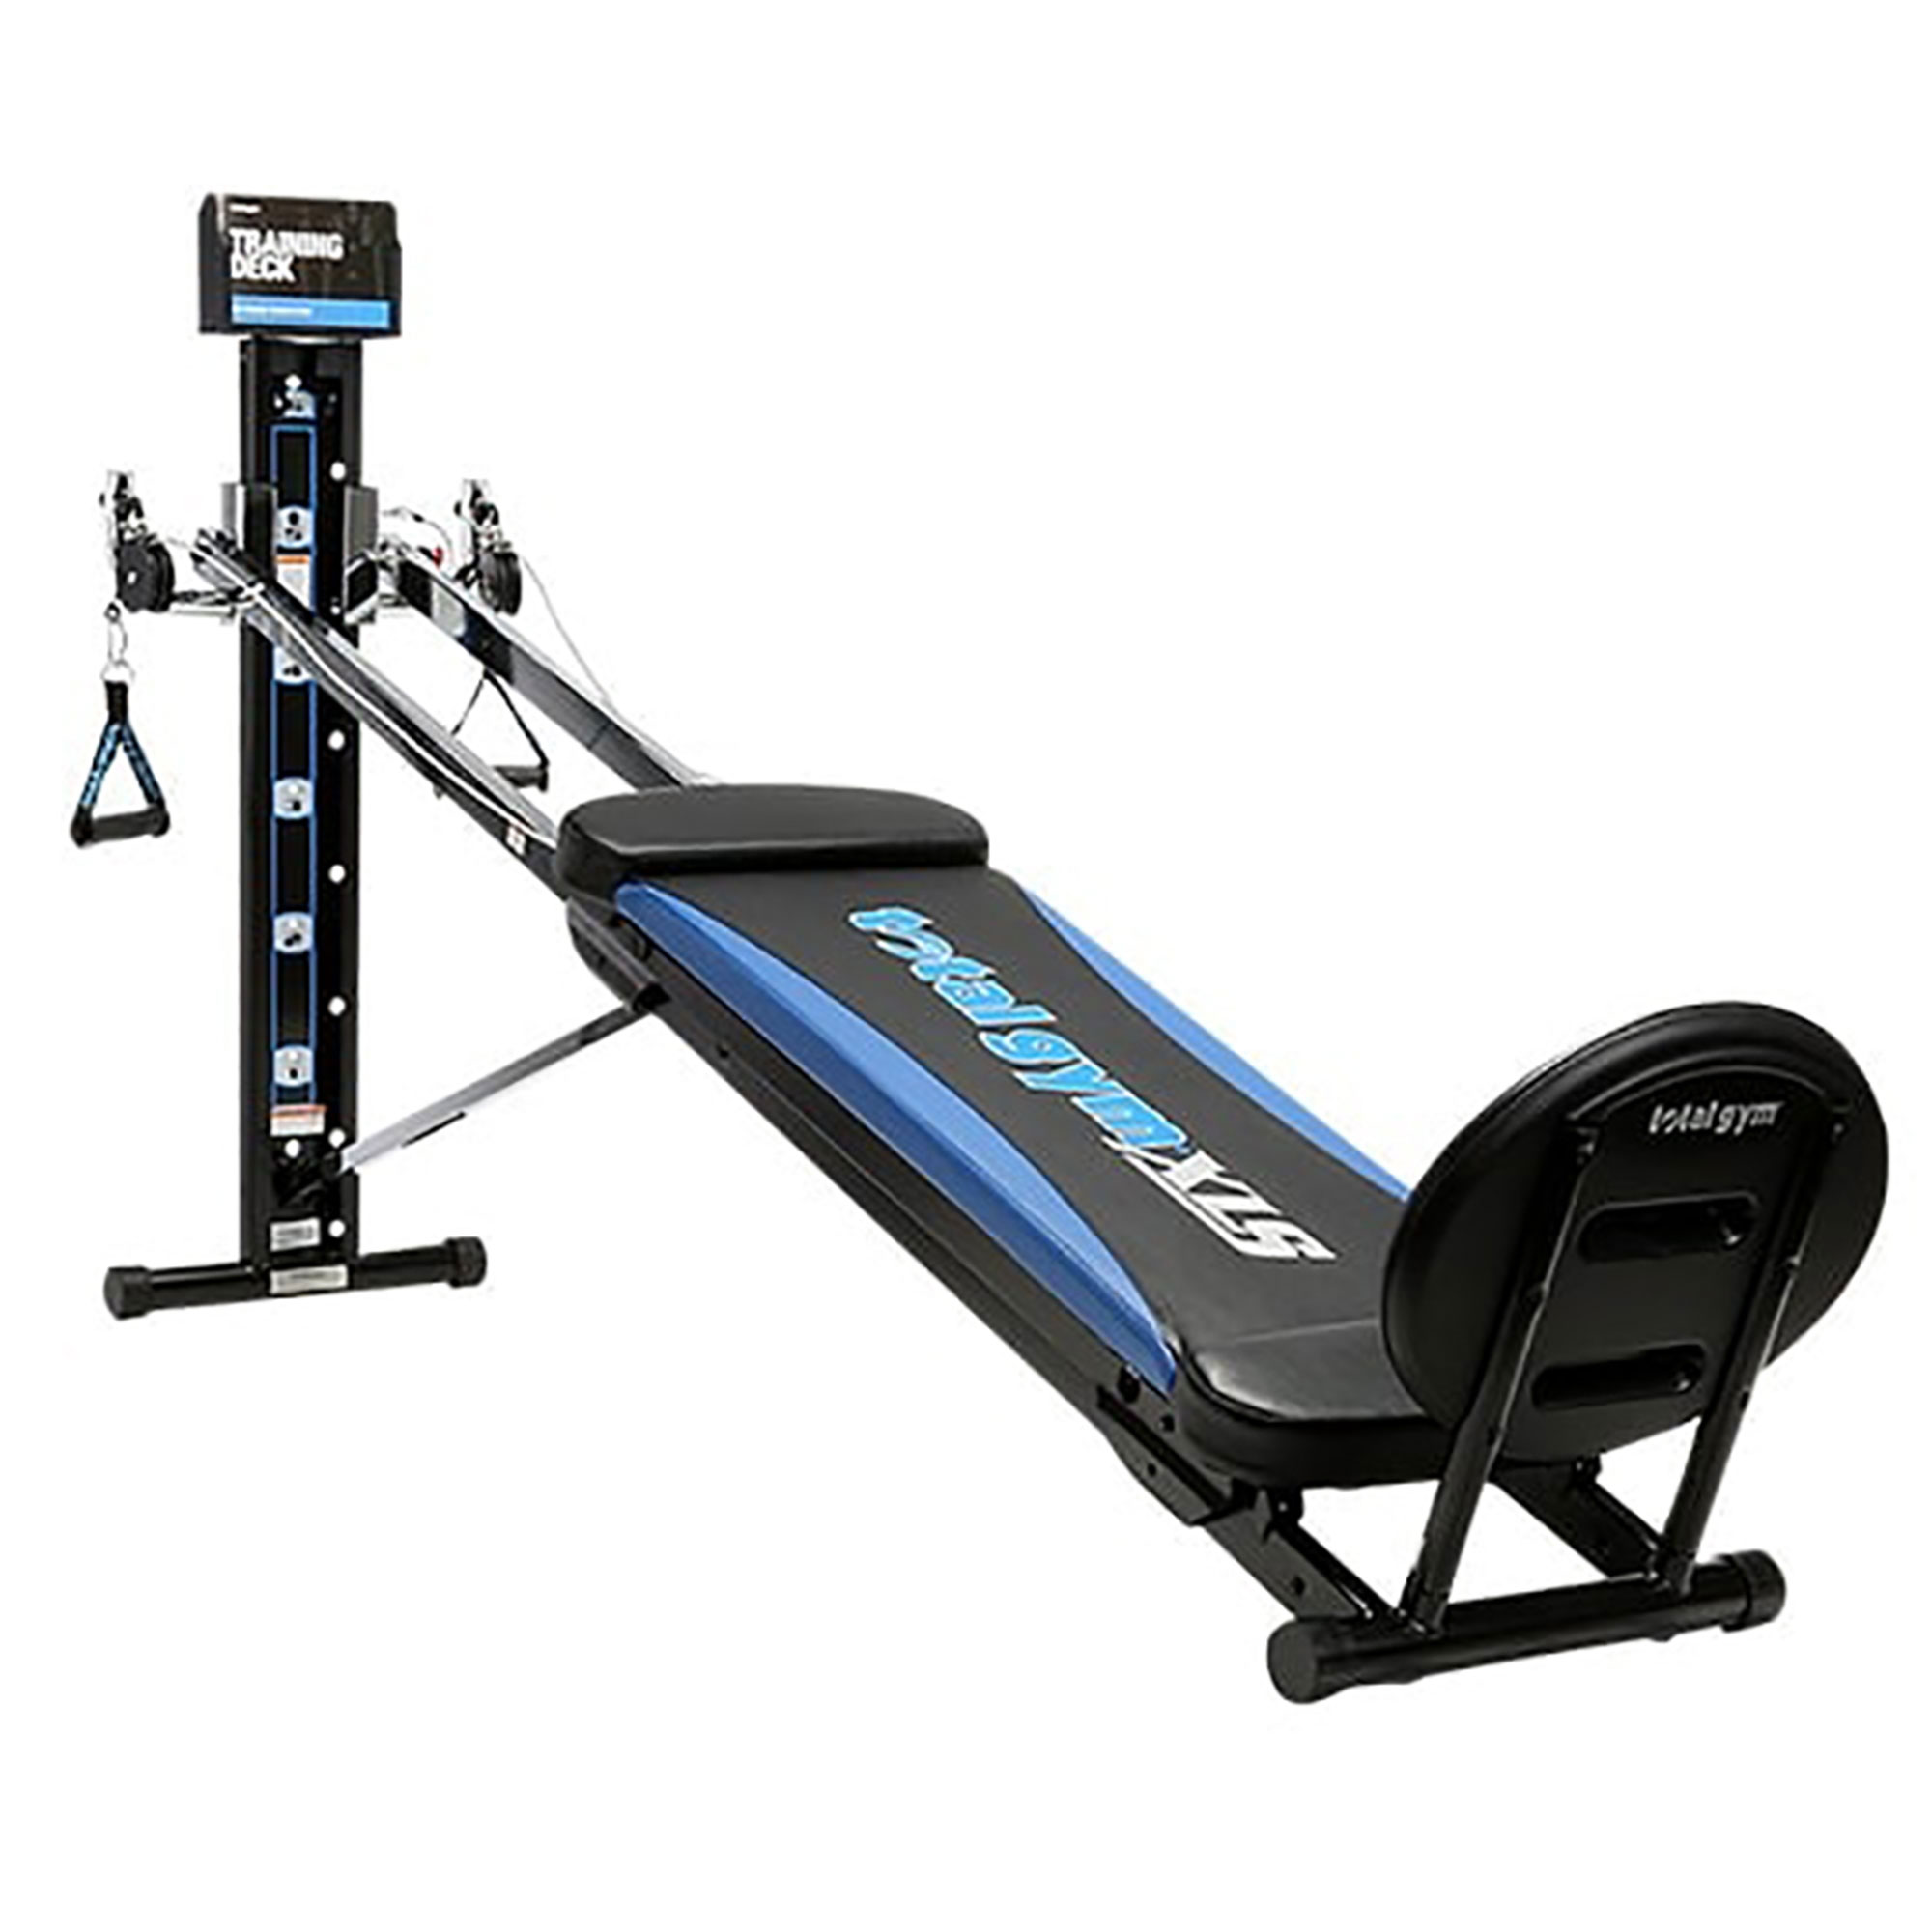 Total Gym XLS Men/Women Universal Fold Home Gym Workout Machine Plus Accessories - image 1 of 11